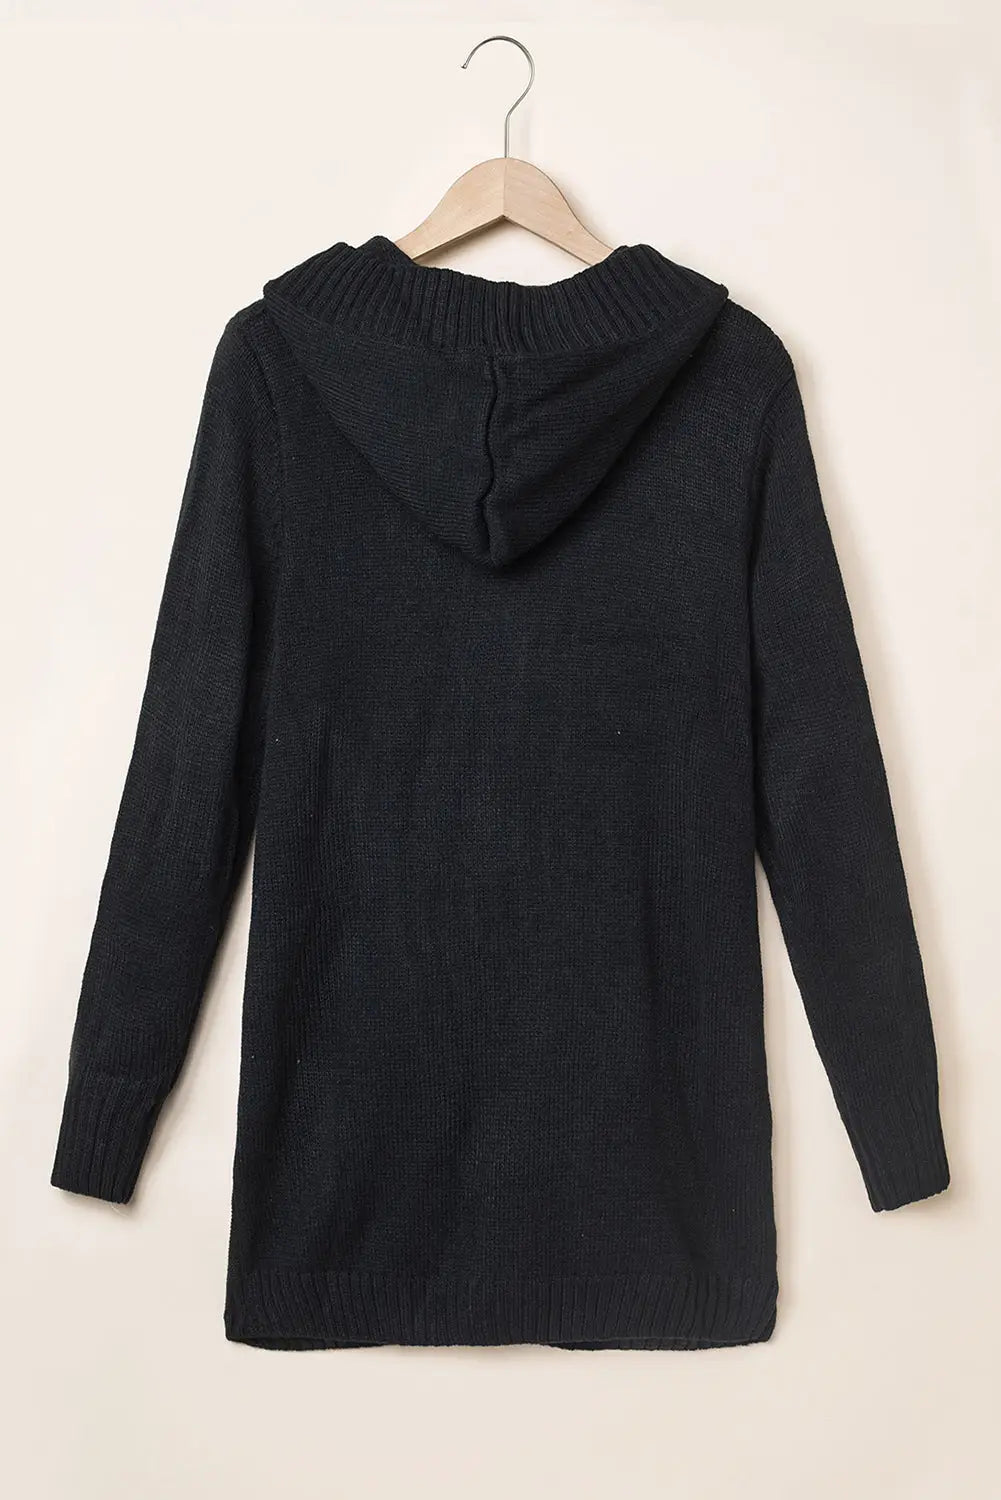 Black twist pattern knit button front hooded cardigan - sweaters & cardigans